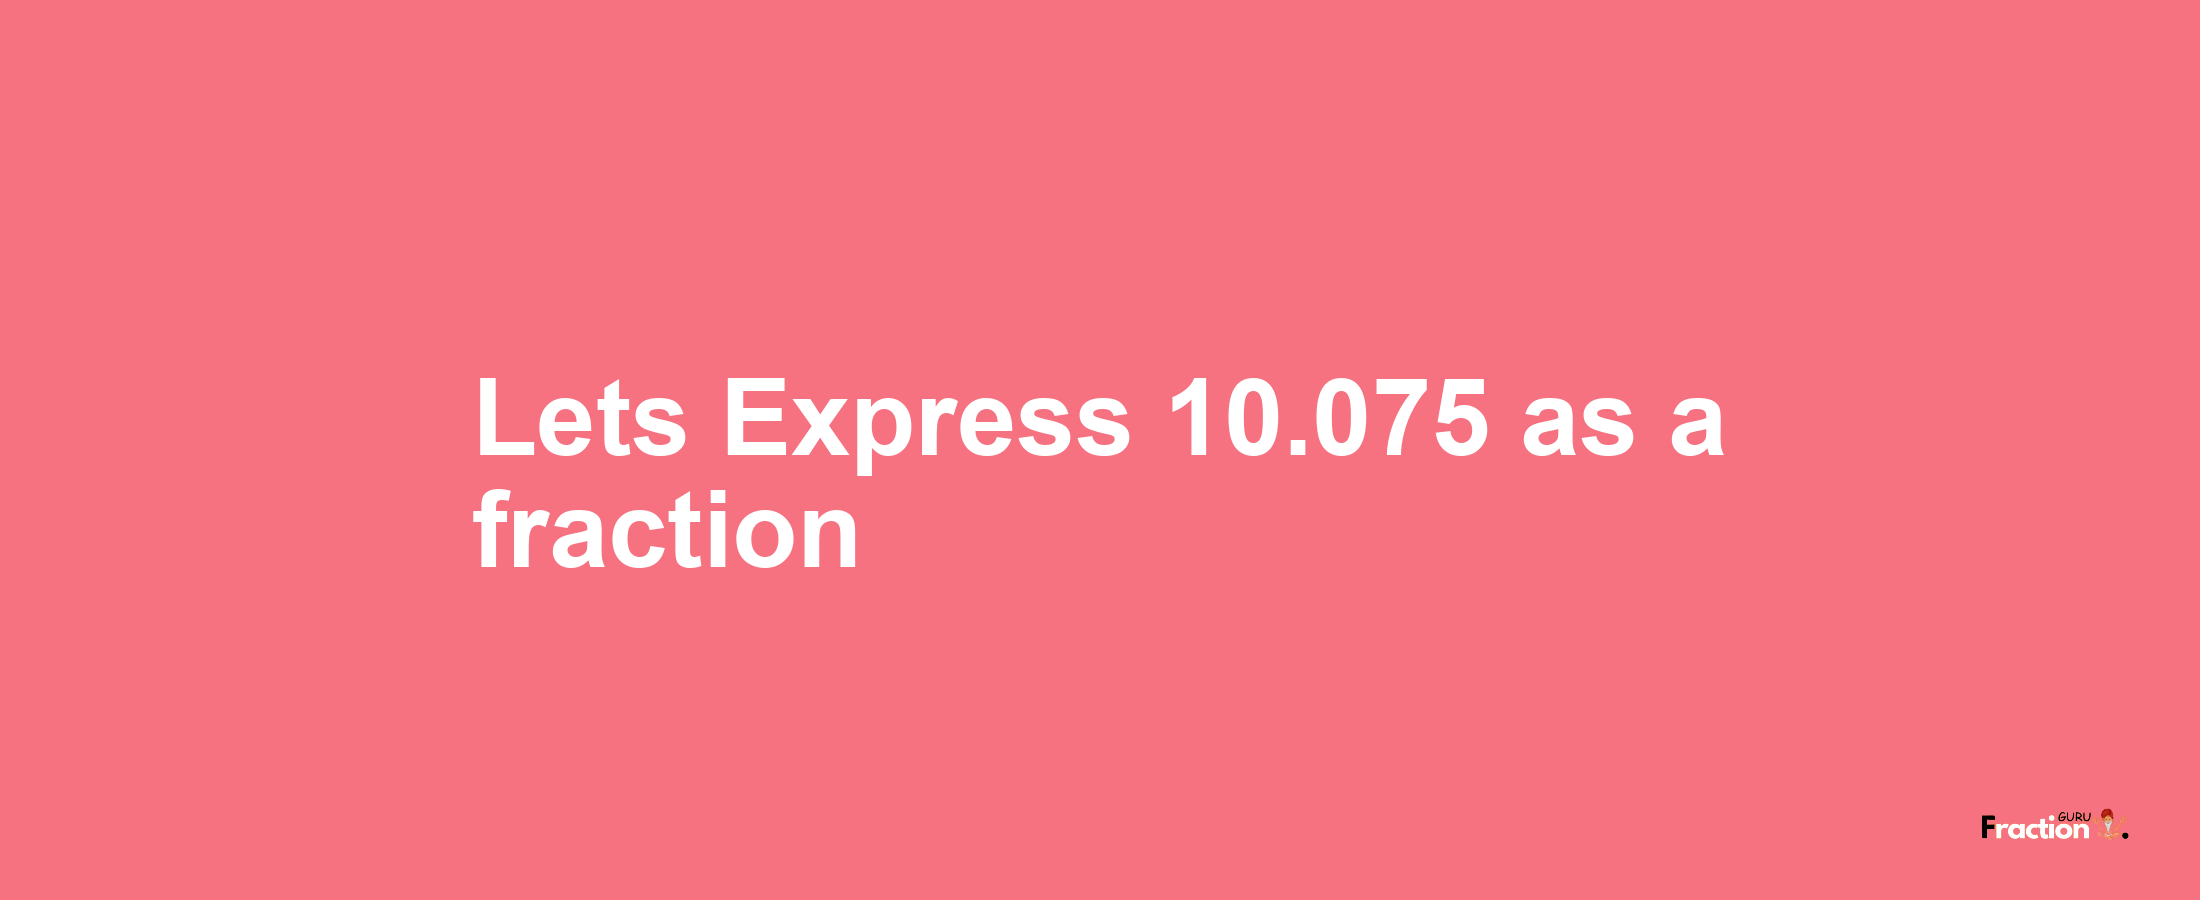 Lets Express 10.075 as afraction